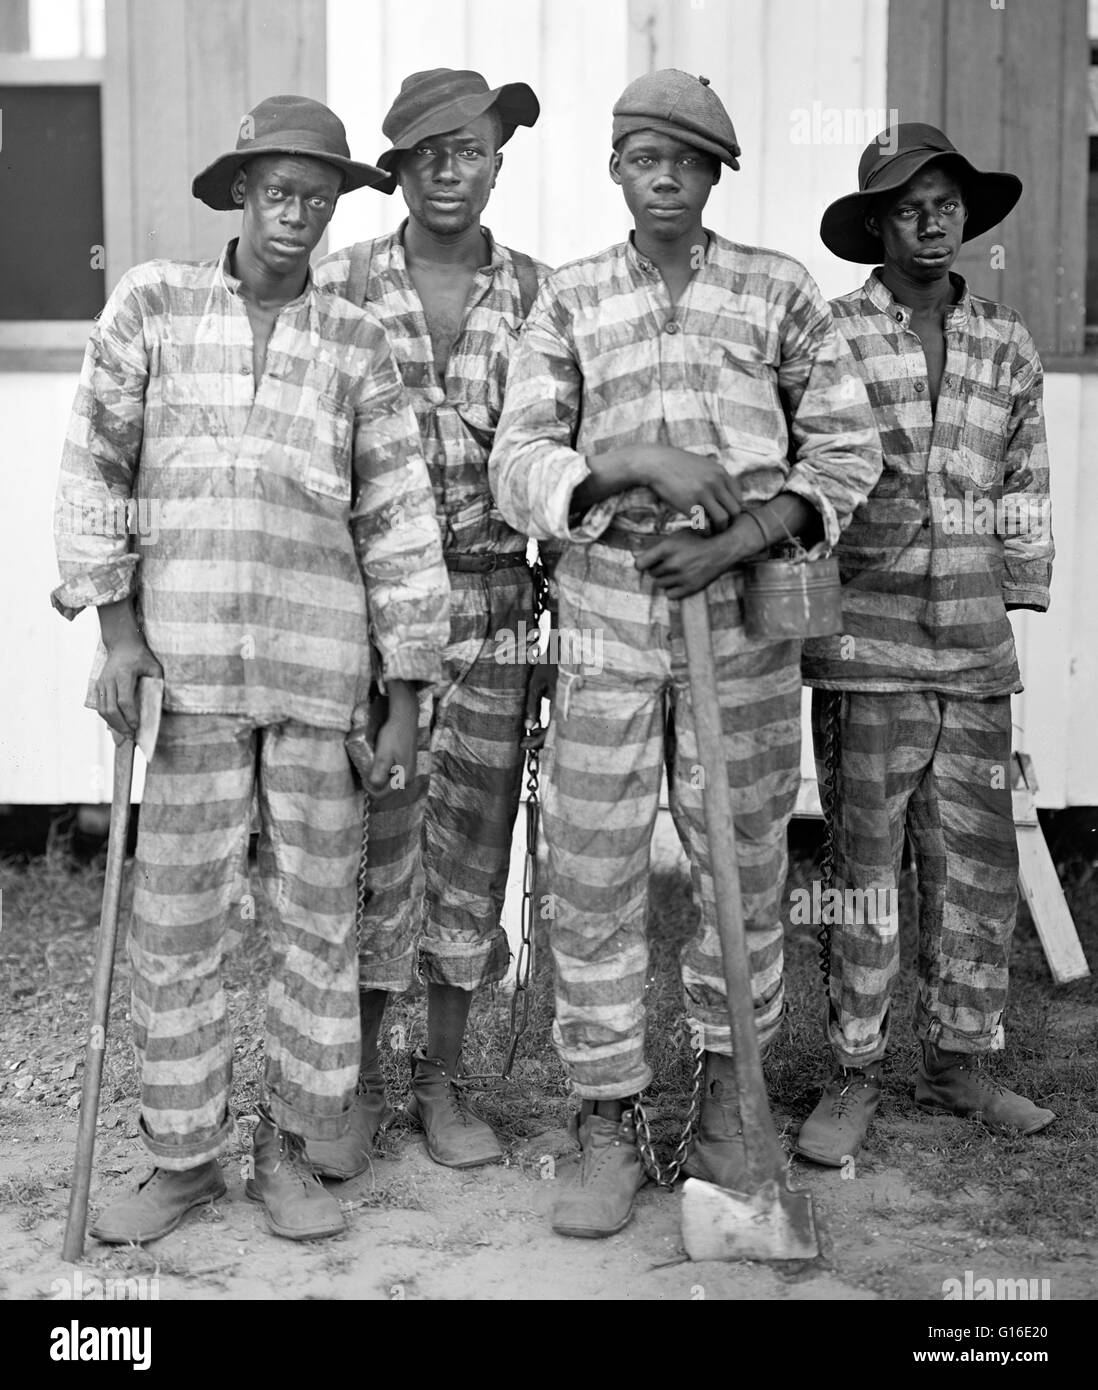 Entitled: 'A Southern chain gang.' Two ankle shackles attached to each other by a short length of chain are known as a hobble or as leg irons. These could be chained to a much longer chain with several other prisoners, creating a work crew known as a chai Stock Photo